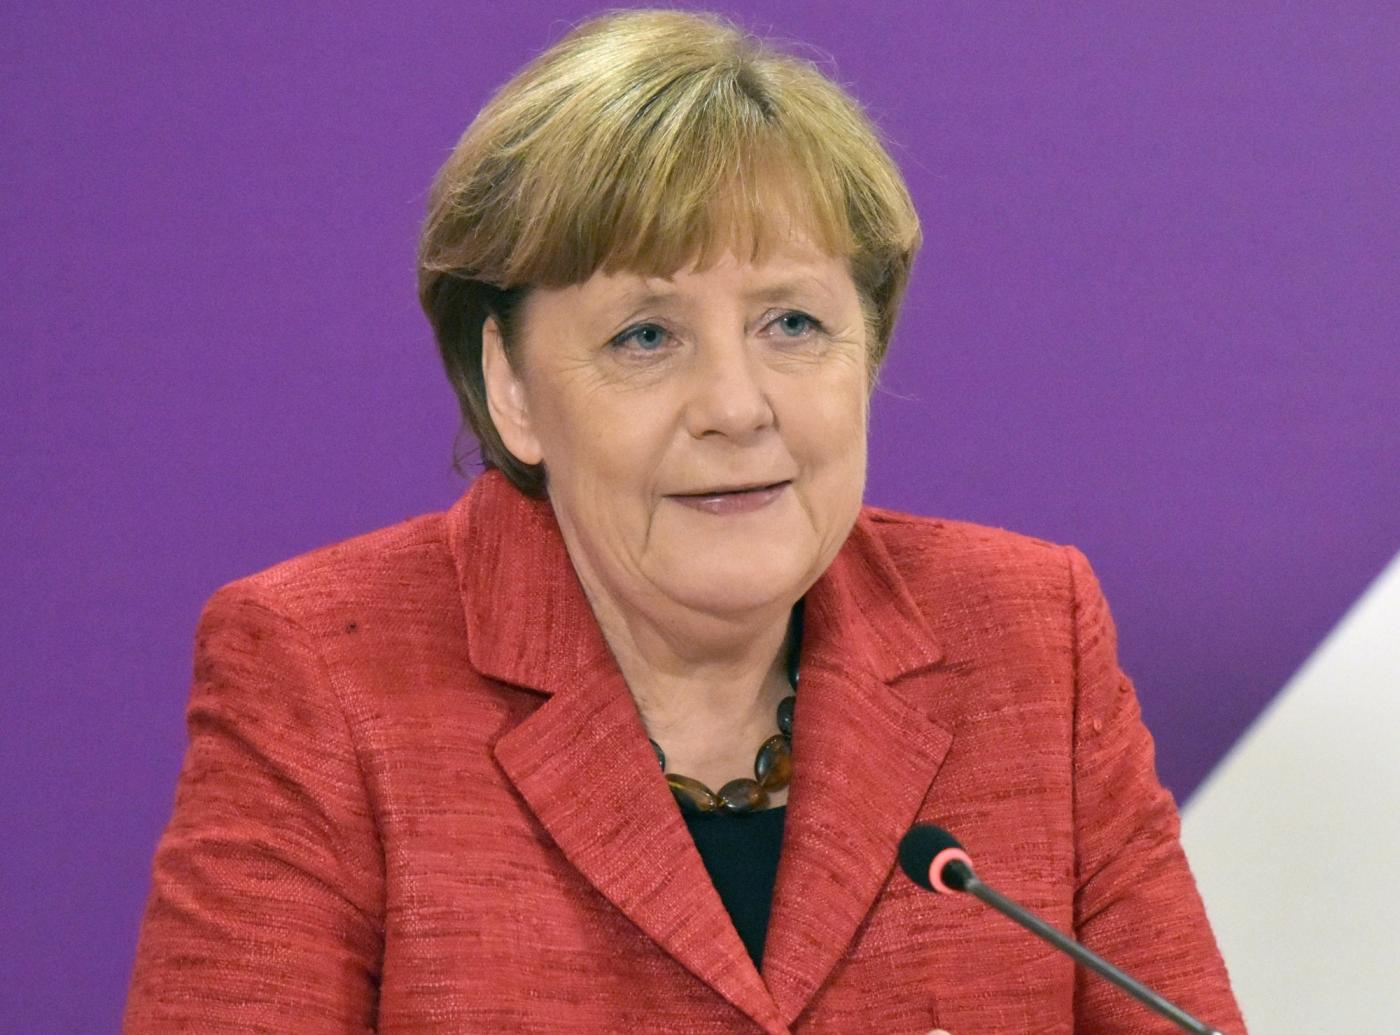 Merkel’s Interior Minister ‘offers to resign’ over migrant issue ...